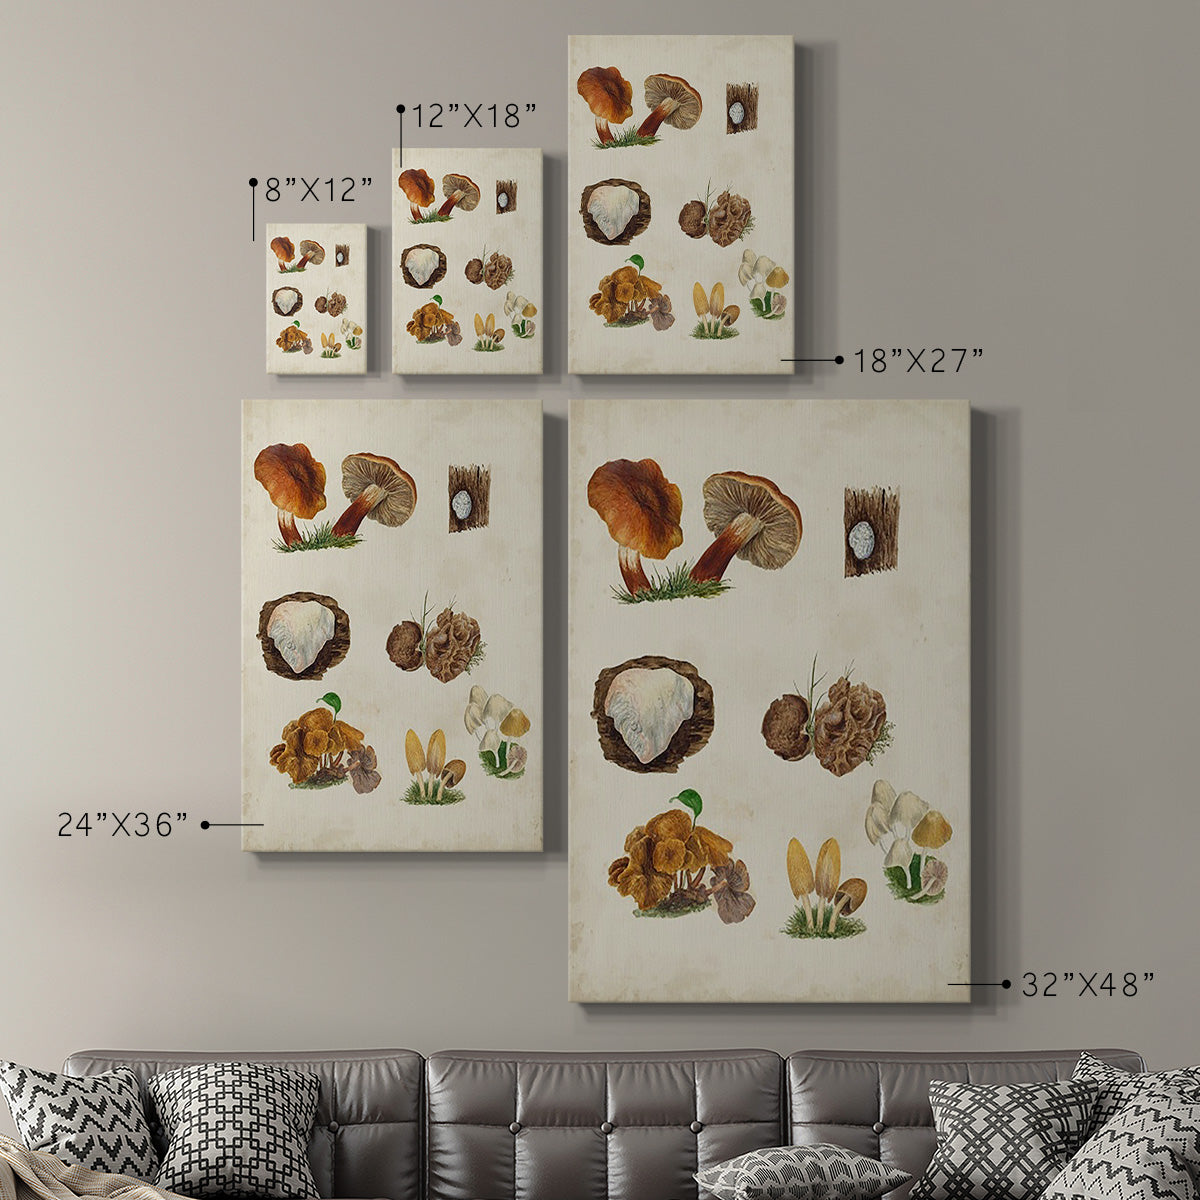 Mushroom Species I Premium Gallery Wrapped Canvas - Ready to Hang